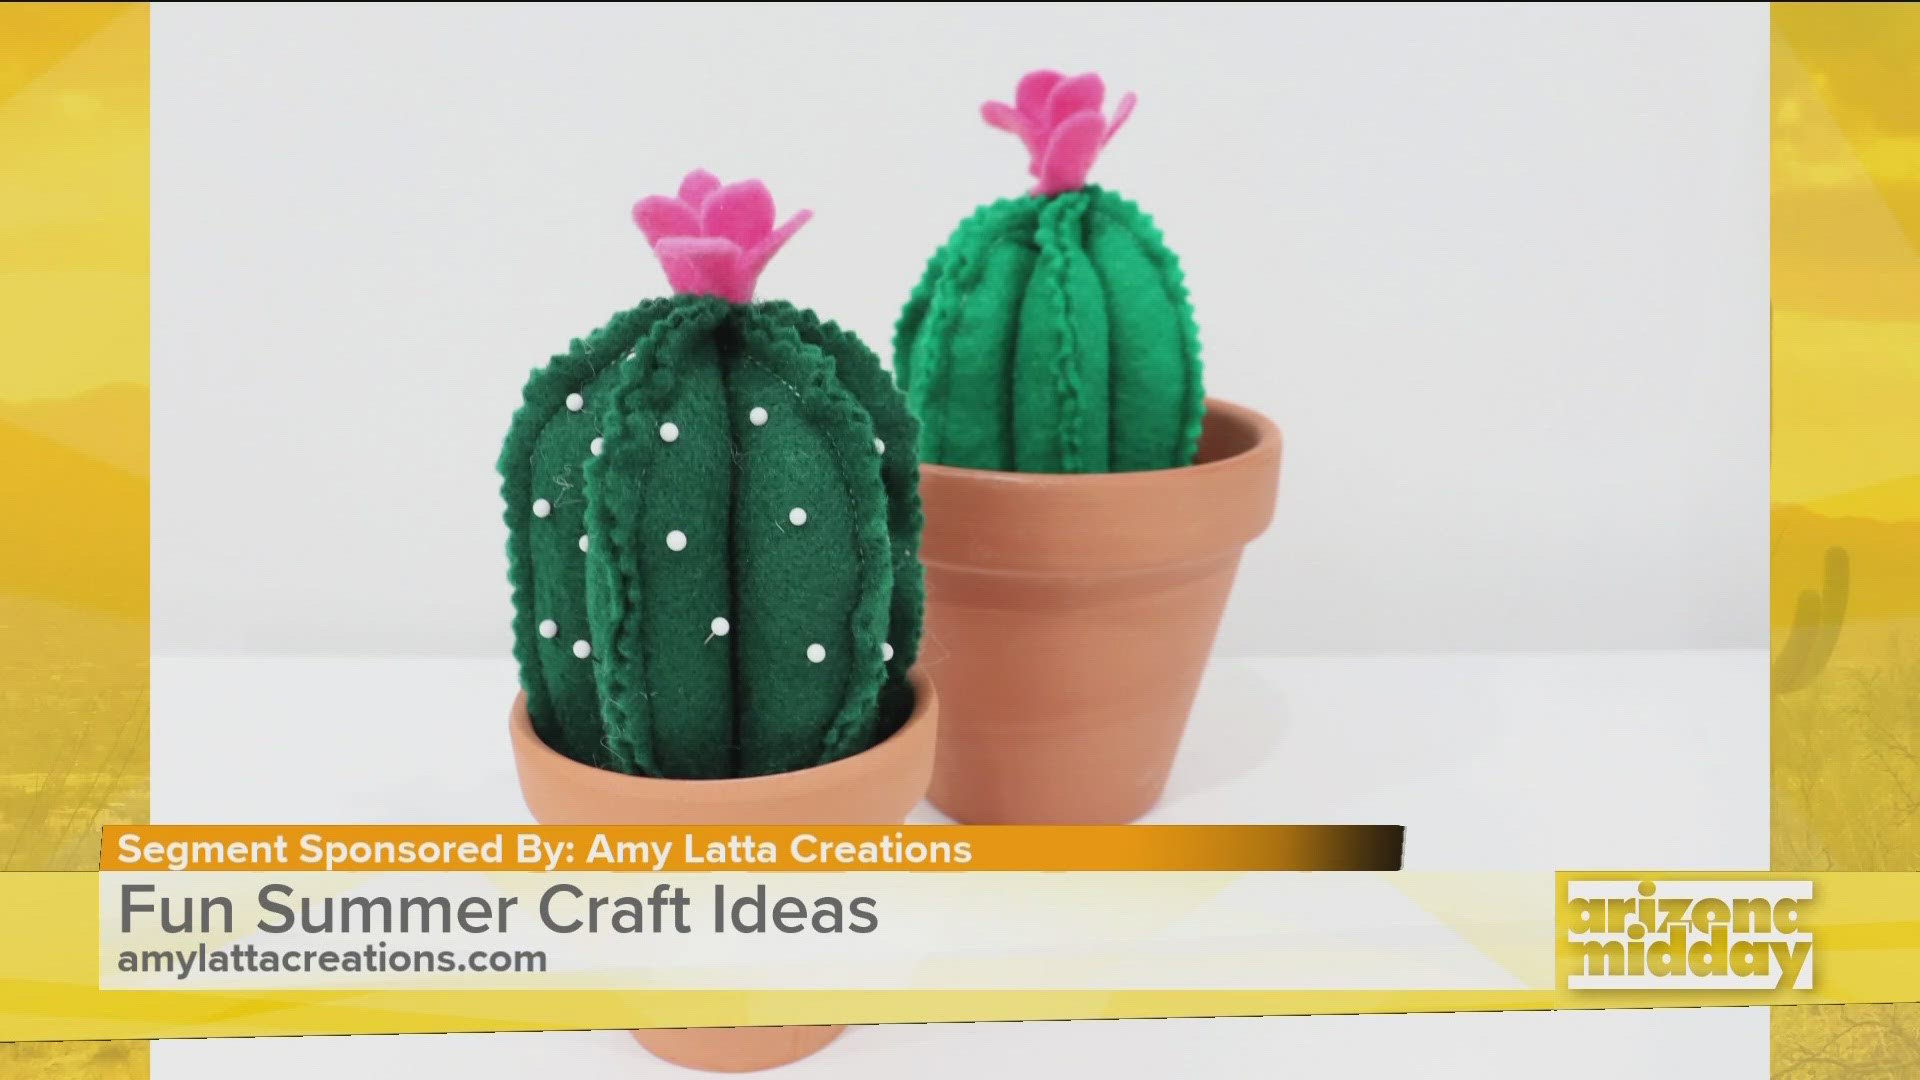 Crafting expert Amy Latta shares with us some fun and easy crafts that kids will love and keep them busy.